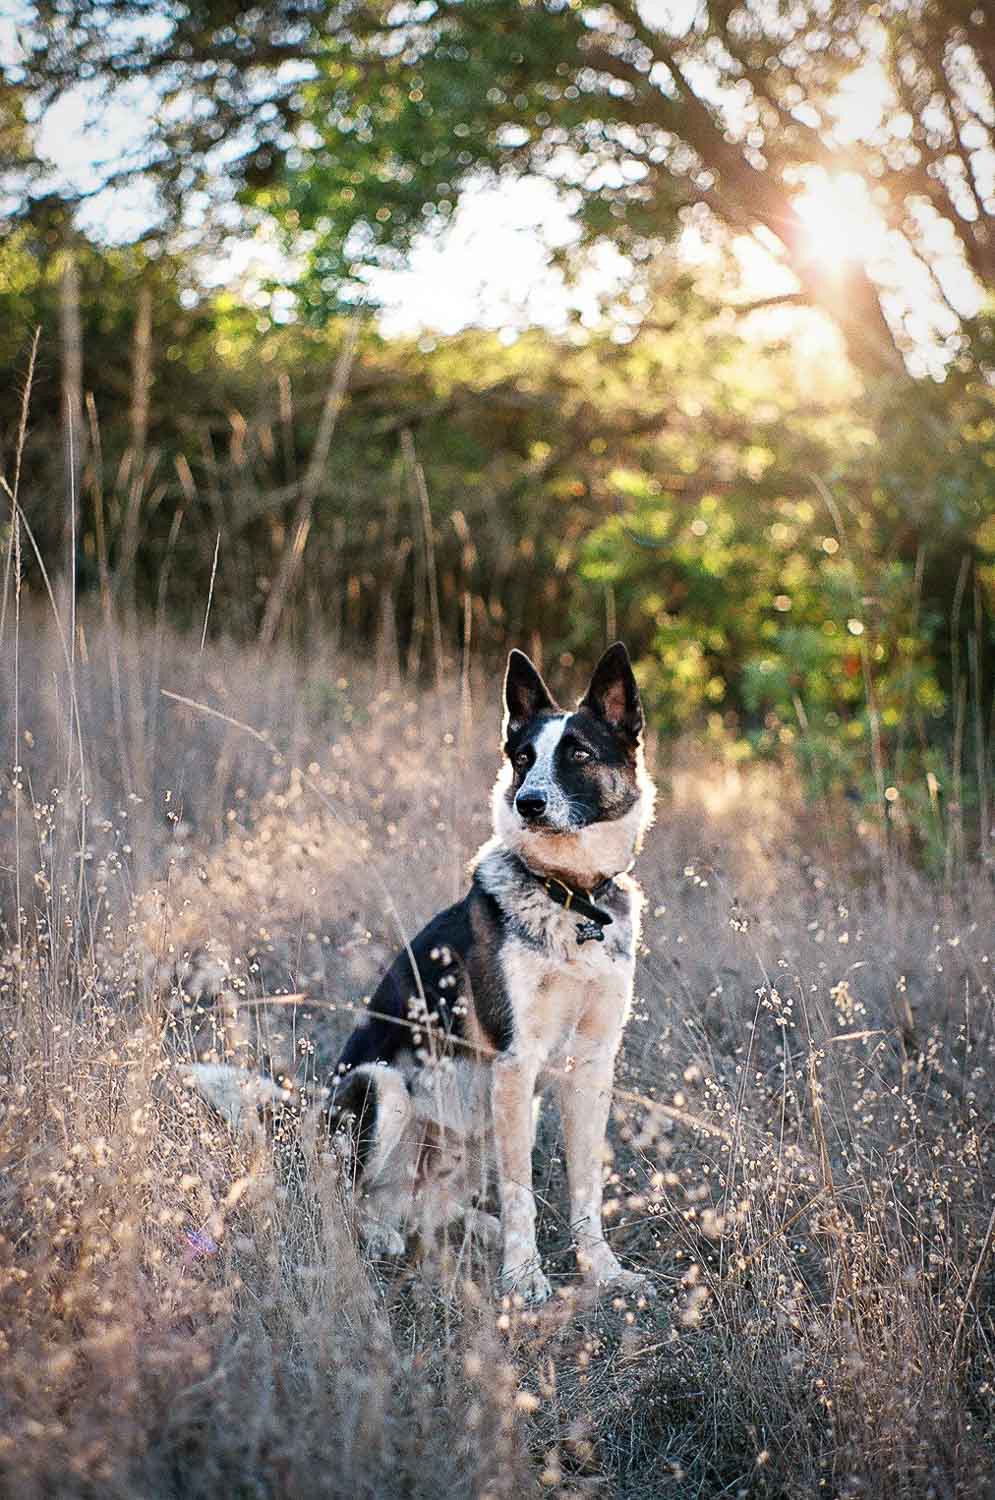 Dog sitting in a field with sunlight filtering through trees in the background.